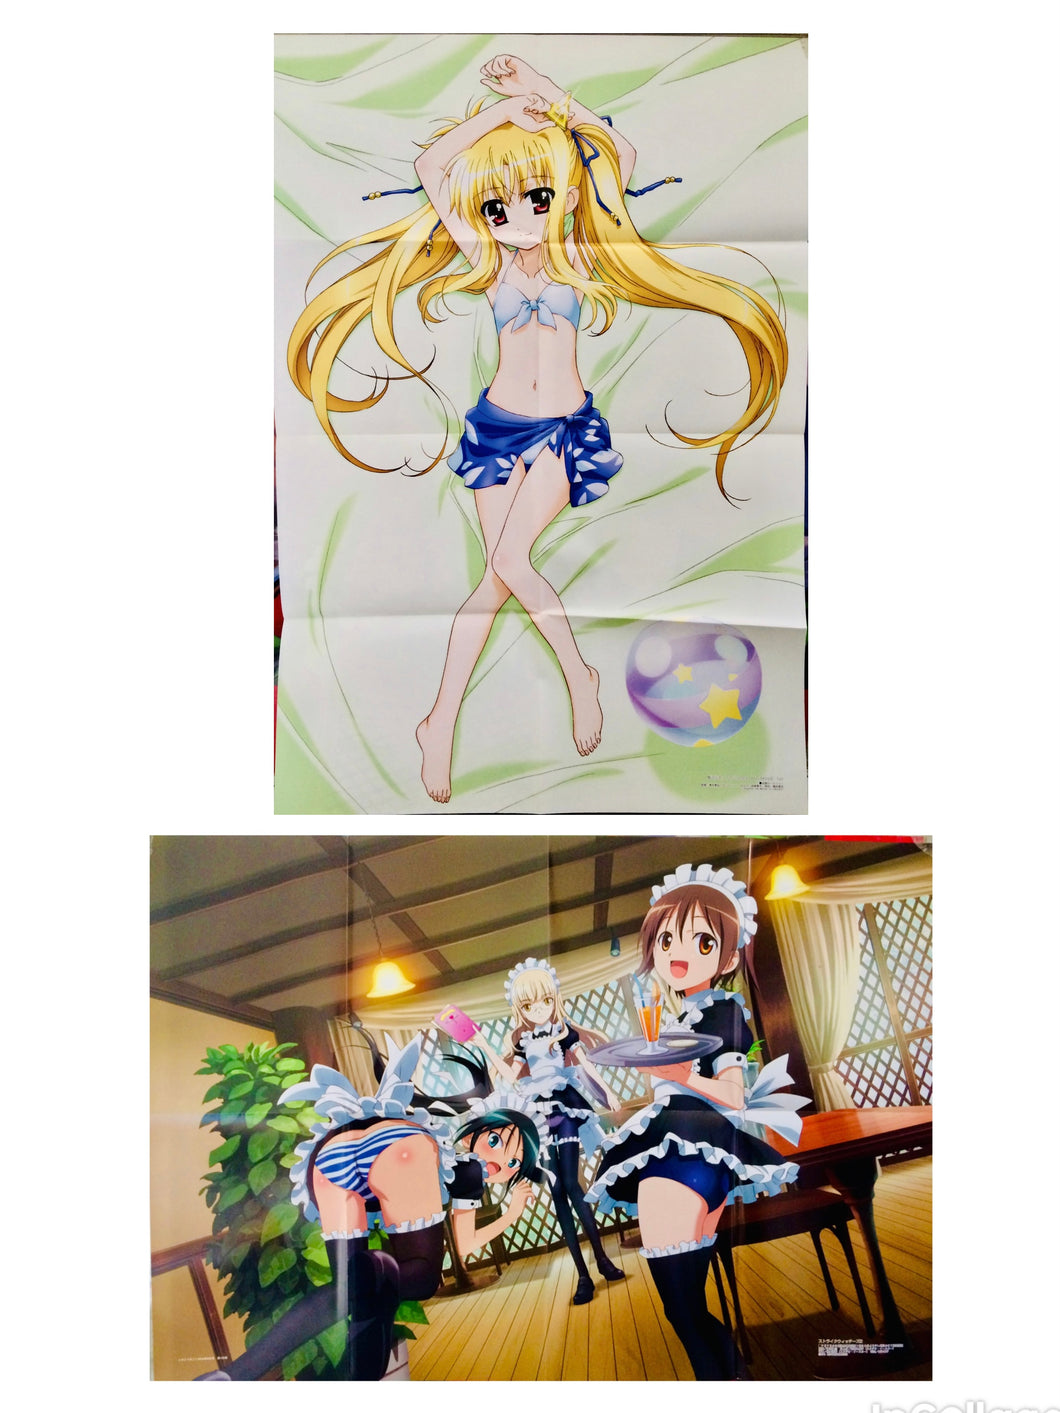 Strike Witches / Magical Girl Lyrical Nanoha The Movie 1st - Double-sided B2 Poster - Appendix